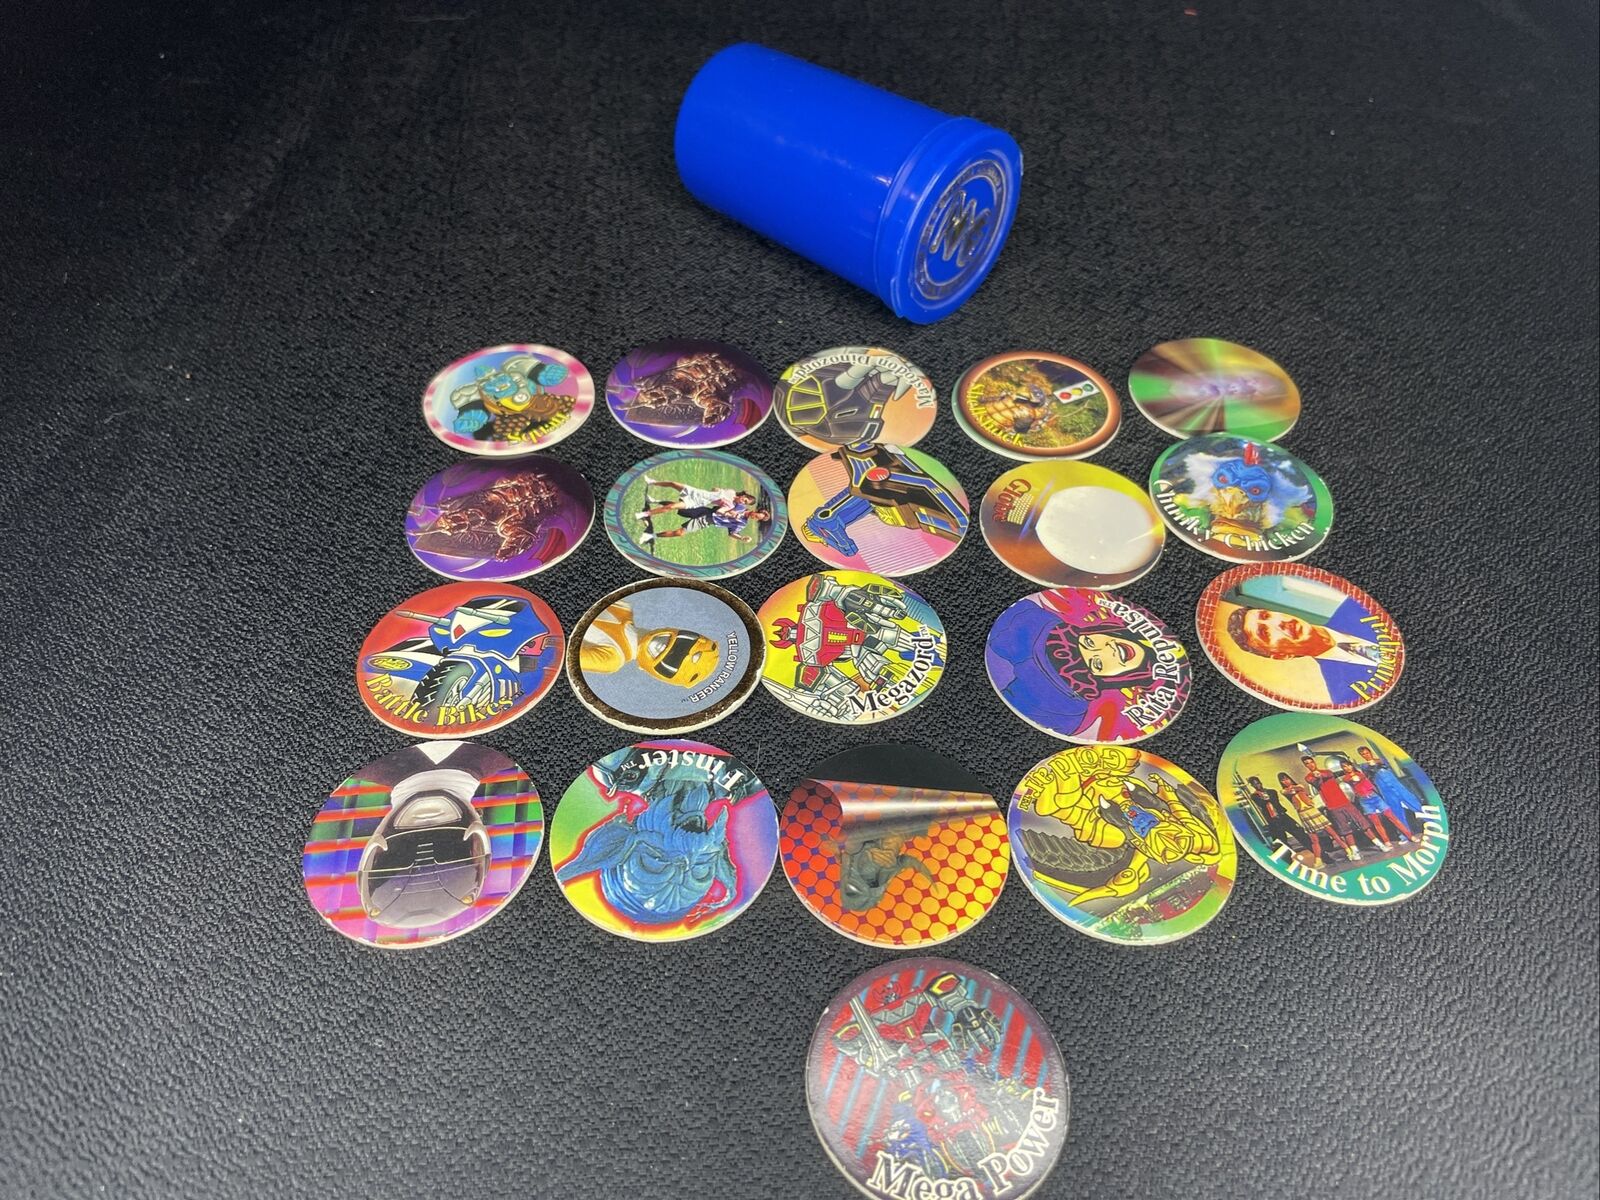 Mighty Morphin Power Rangers Pogs - 21 Pieces And Storage Tube